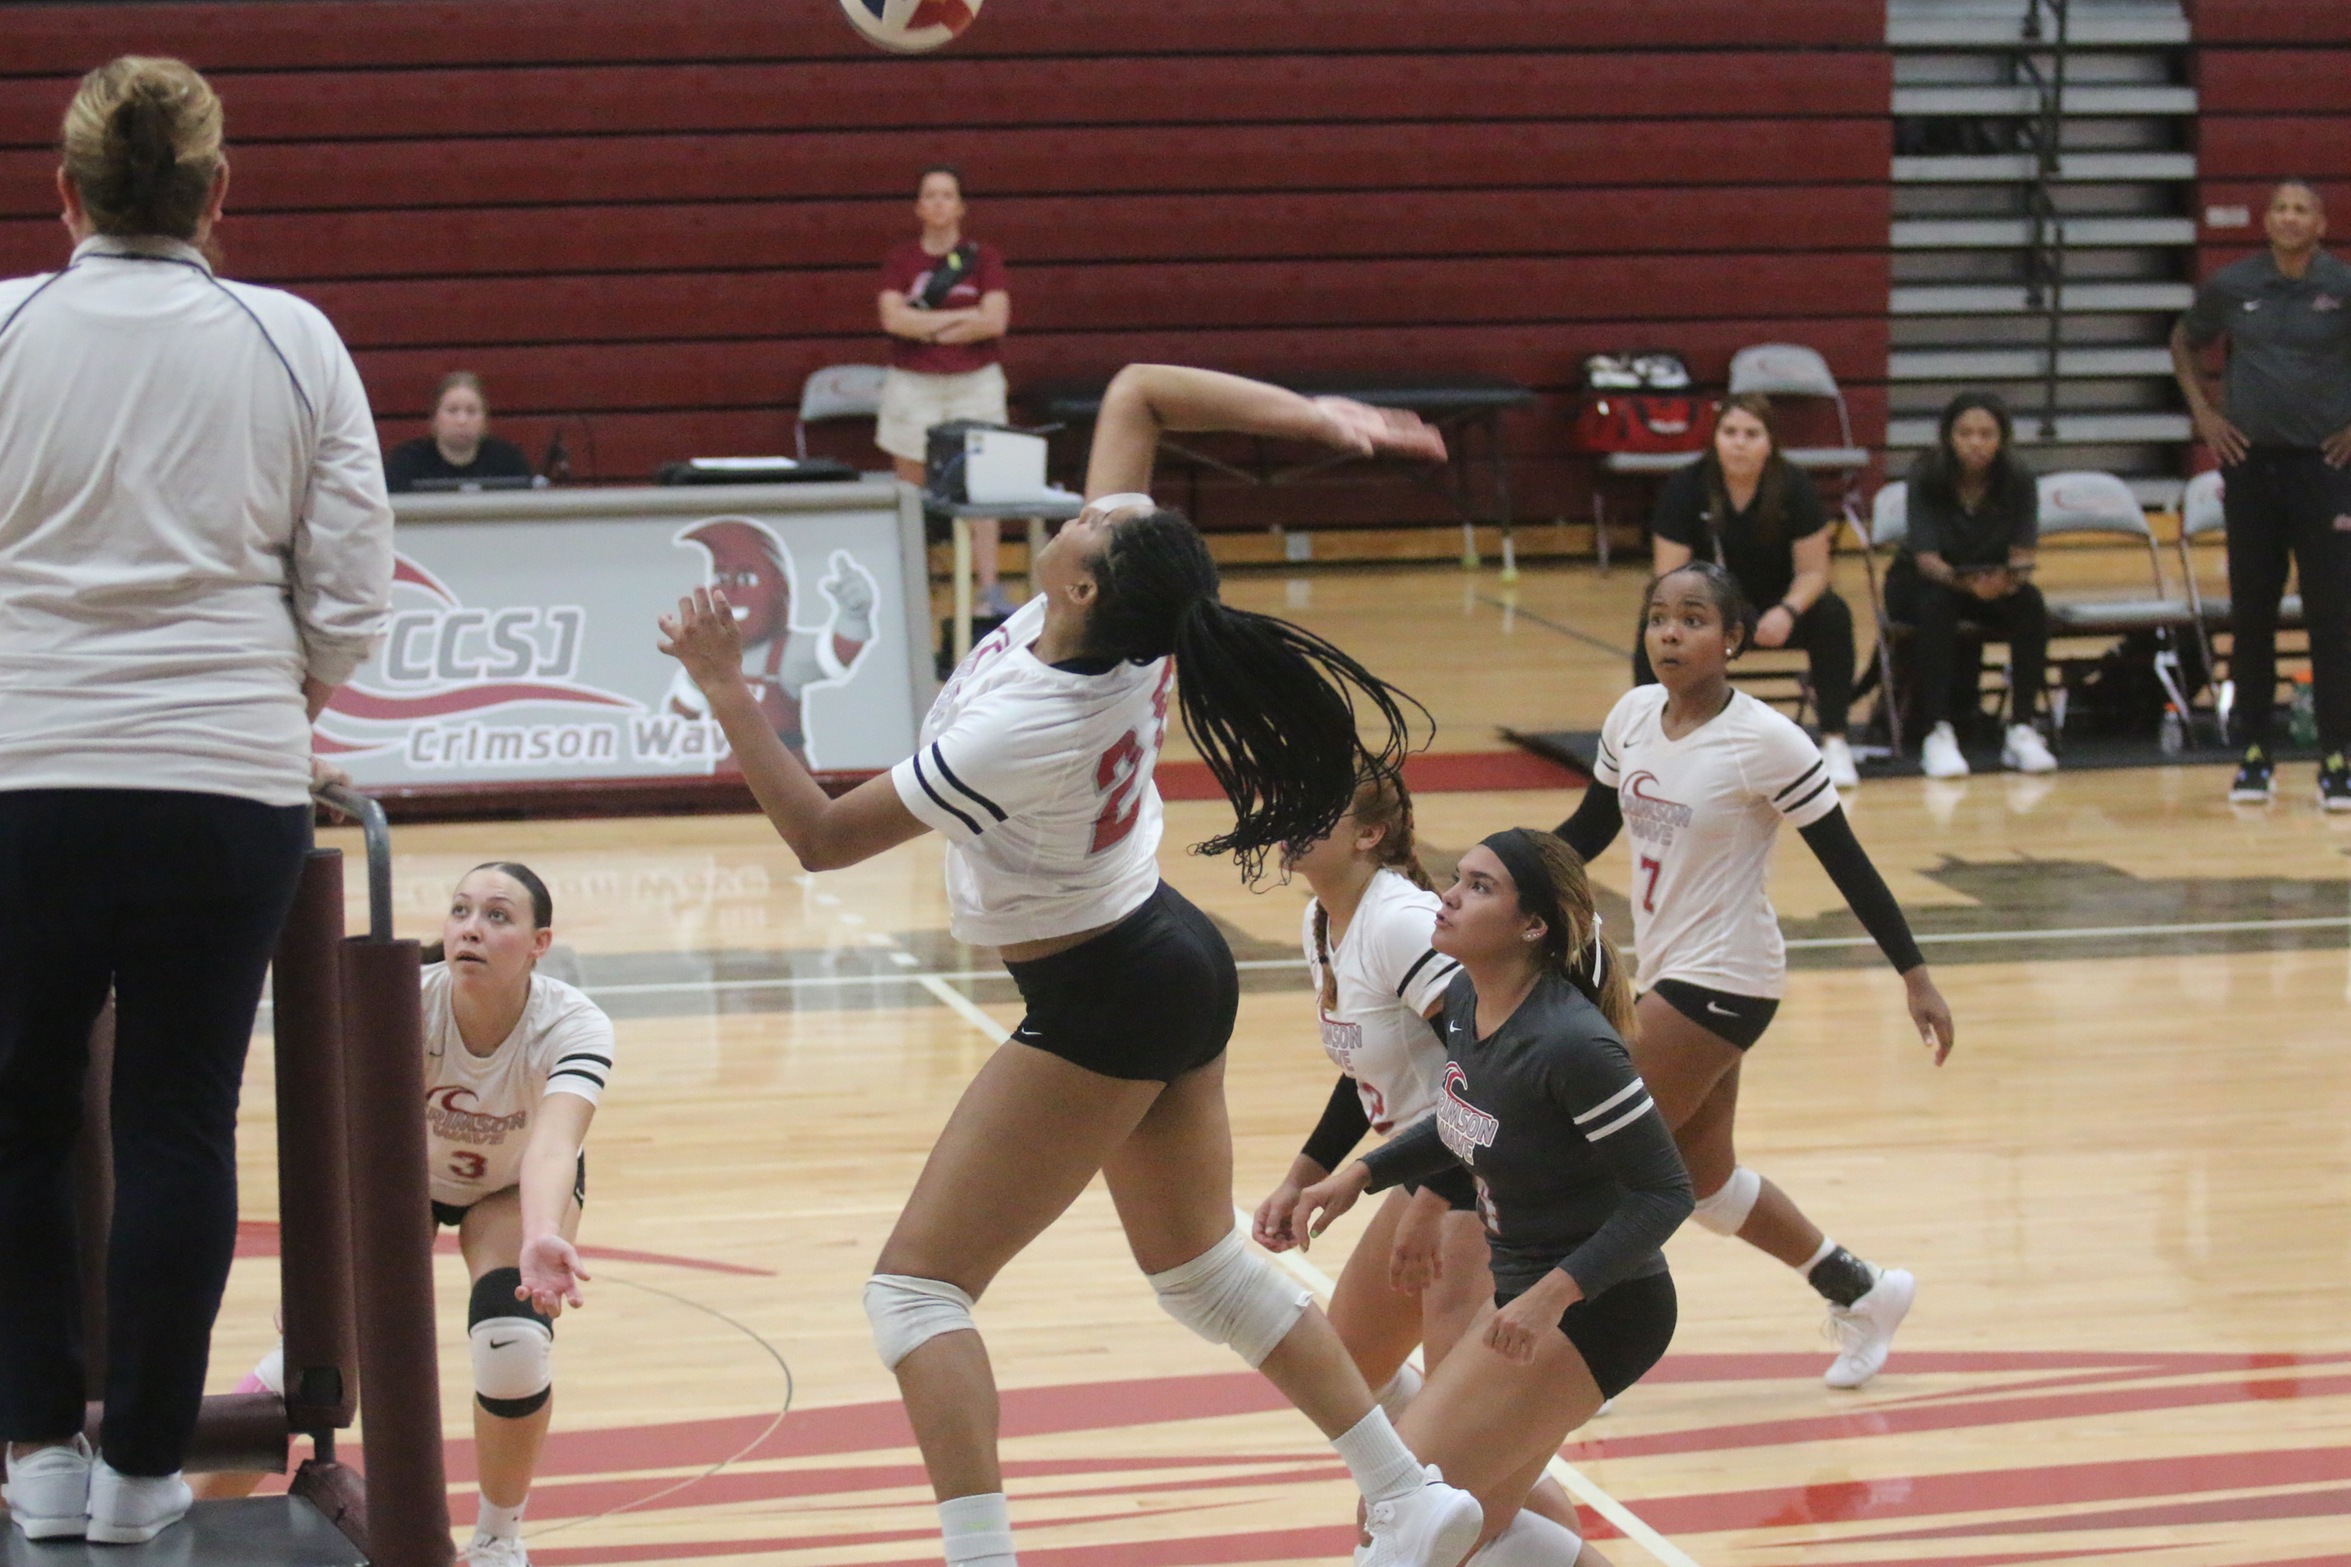 Women’s Volleyball earns fourth straight win with first-ever defeat of St. Xavier